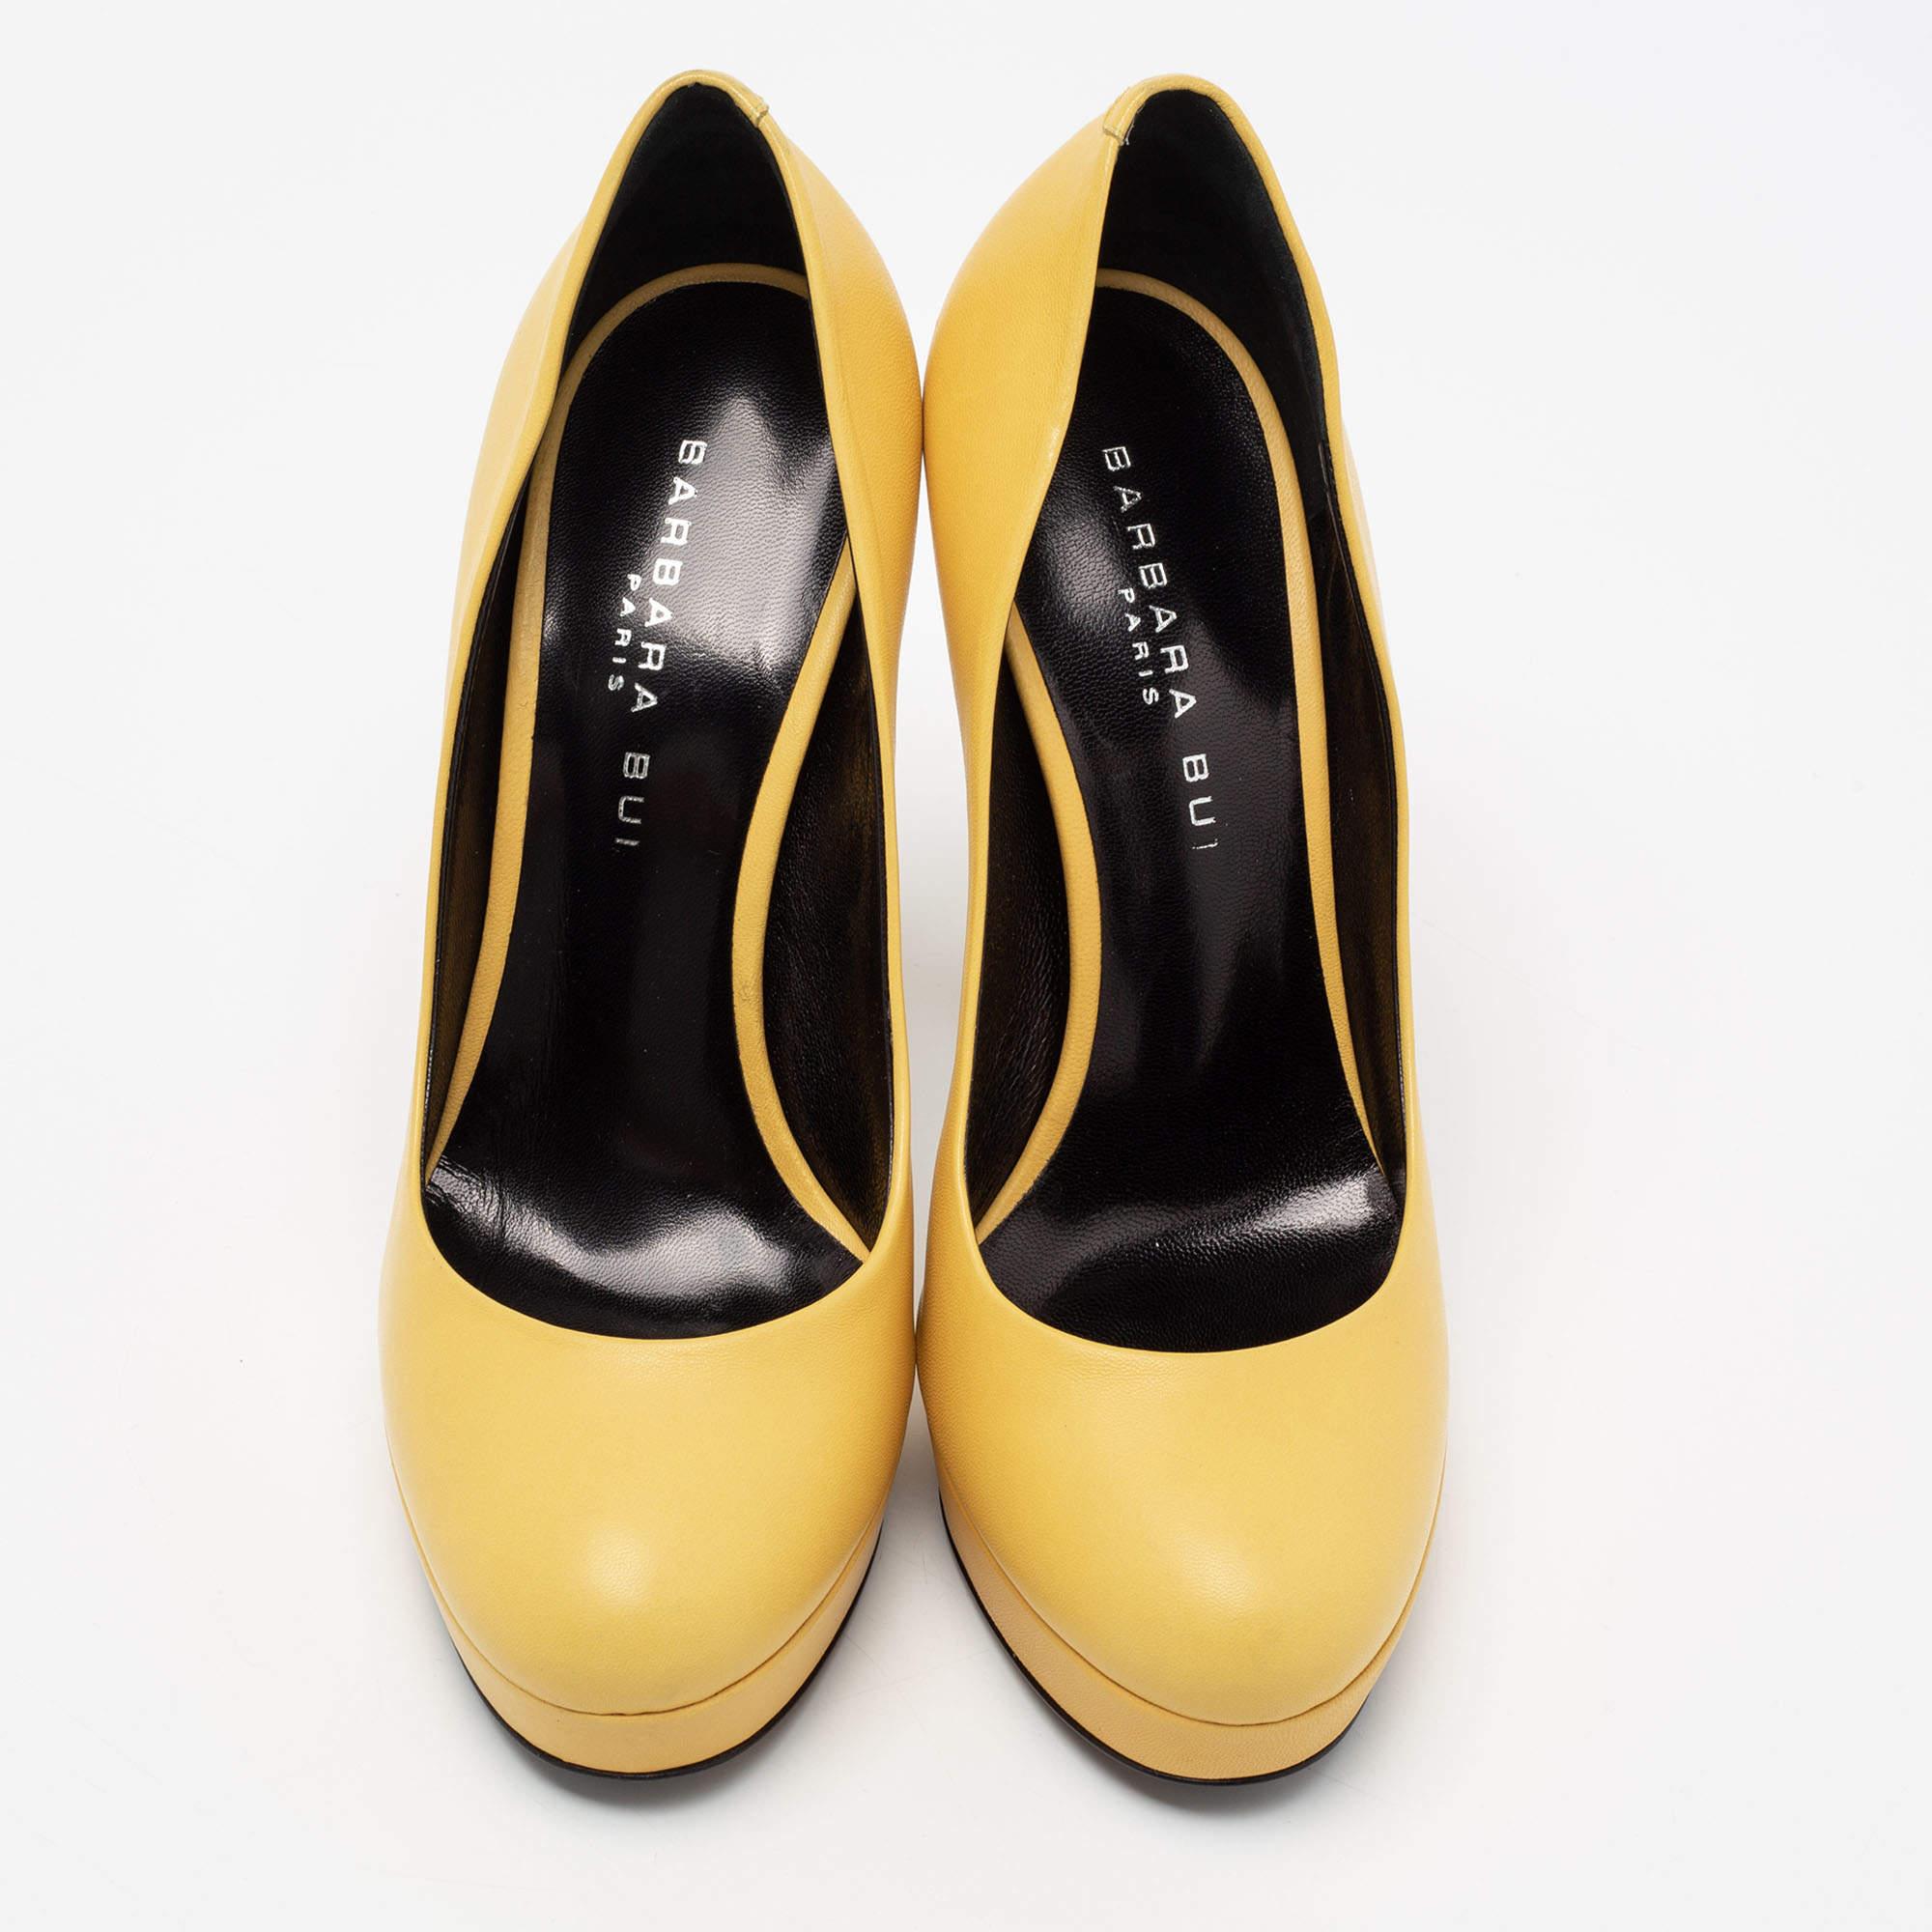 Lend an uber-chic look to your ensemble in this pair of leather pumps. With this one, Barbara Bui has brought yet another comfortable pair of footwear. Upgrade your everyday look by pairing your outfit with these yellow platform